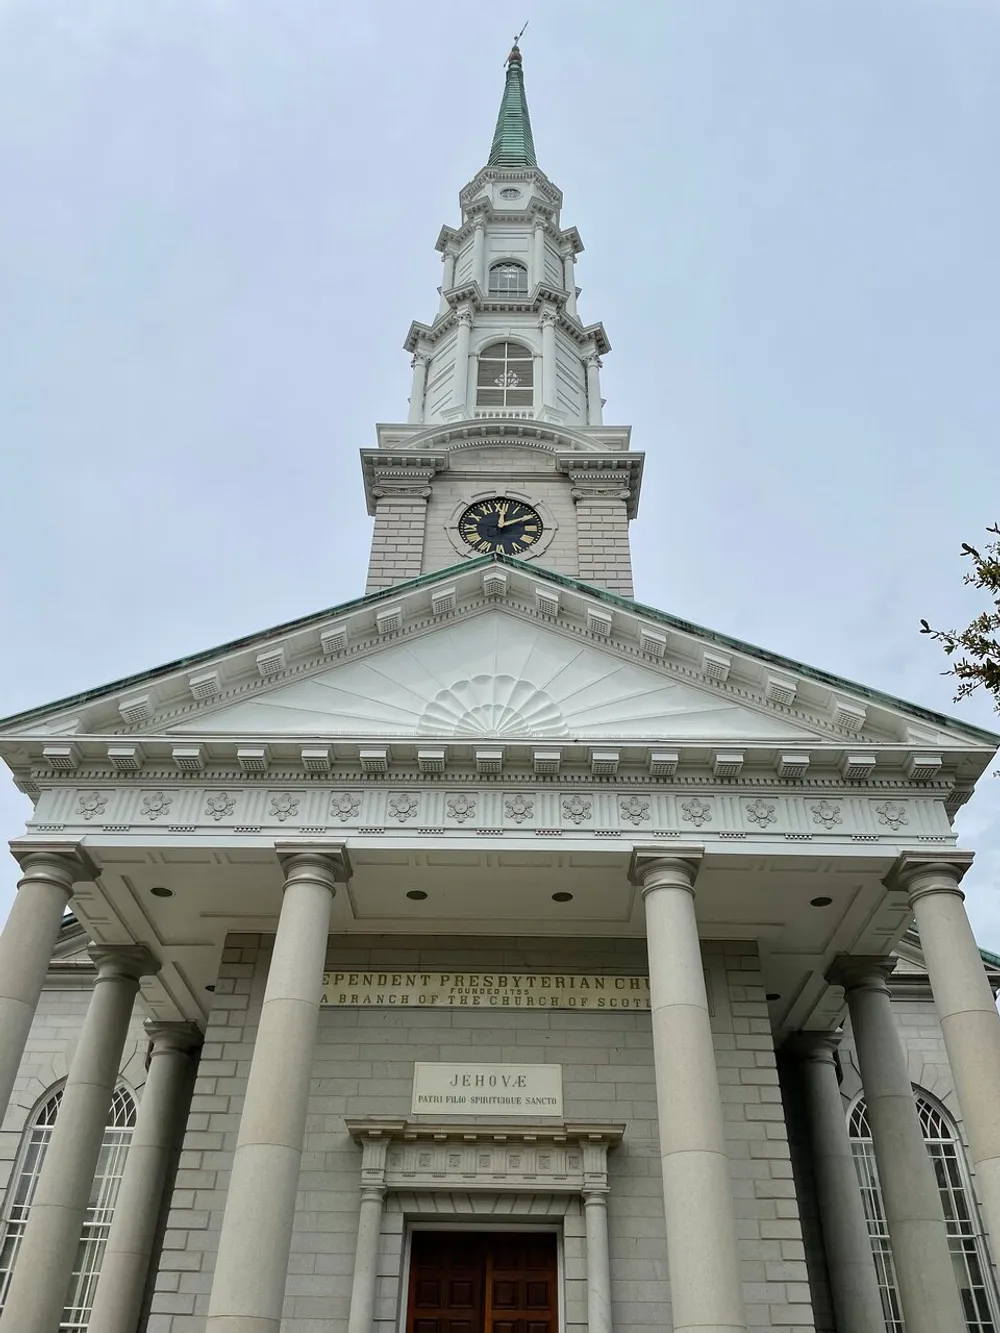 The image displays the front facade of the Independent Presbyterian Church with a prominent clock tower and classic architectural features